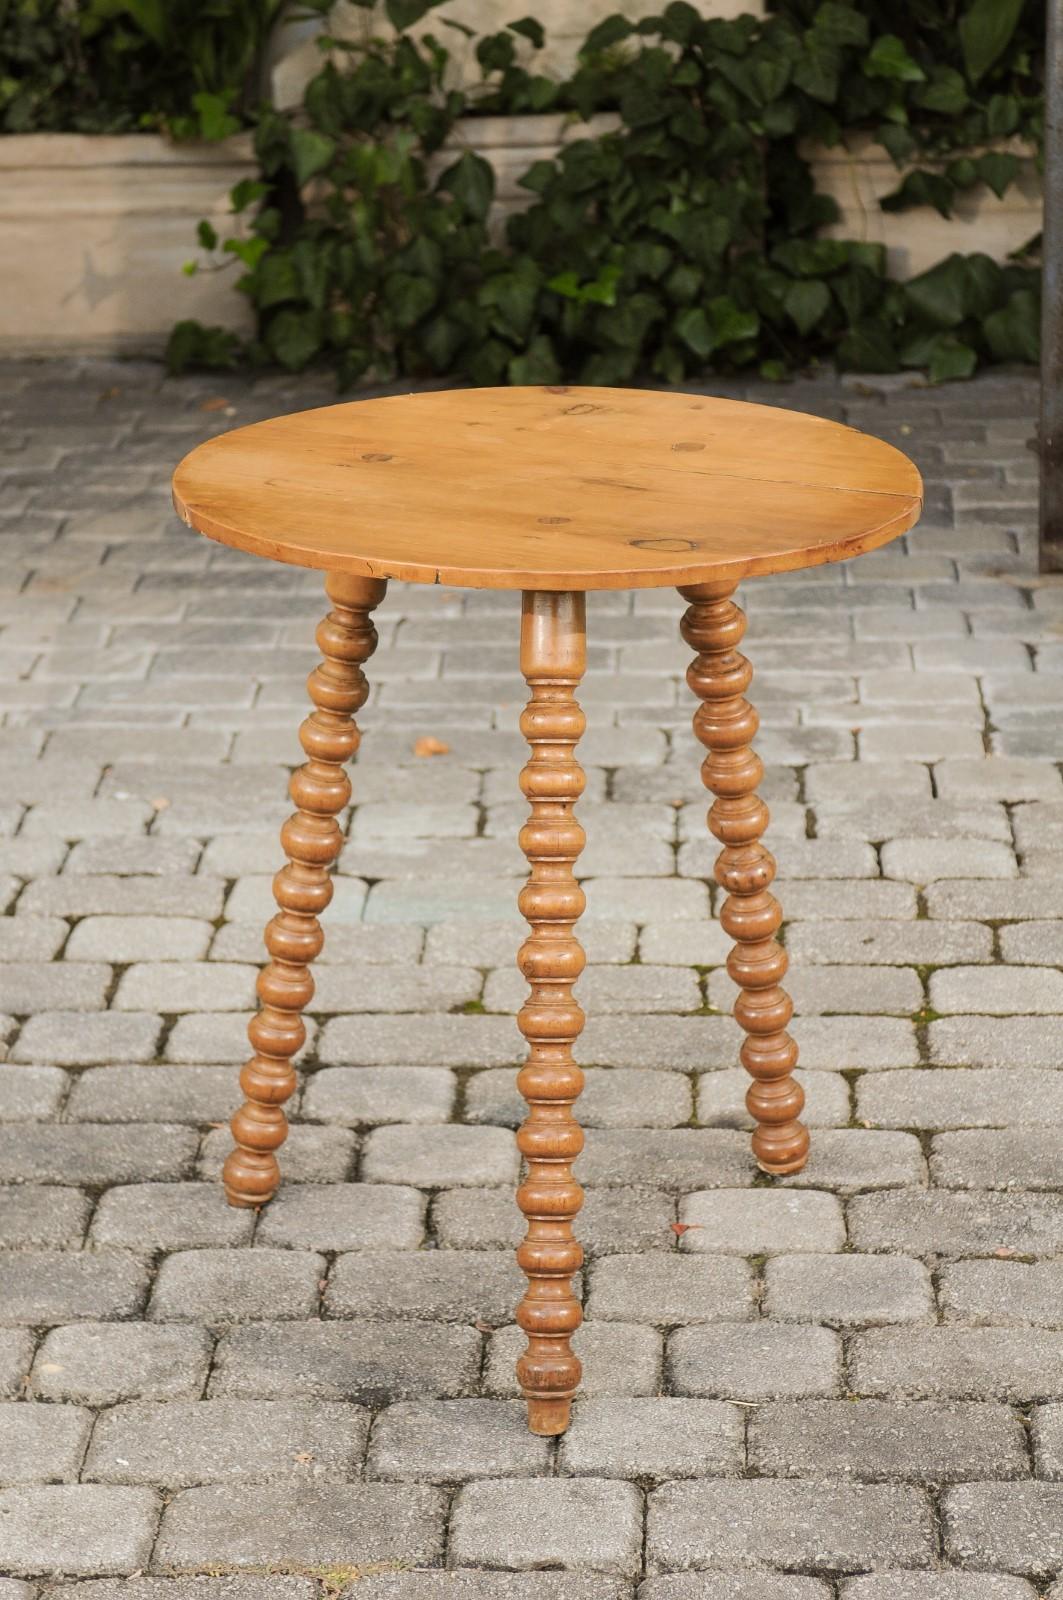 An English pine cricket table from the late 19th century, with bobbin legs and round top. Born in England during the last quarter of the 19th century, this charming cricket table features a circular top sitting above three eye-catching, slightly